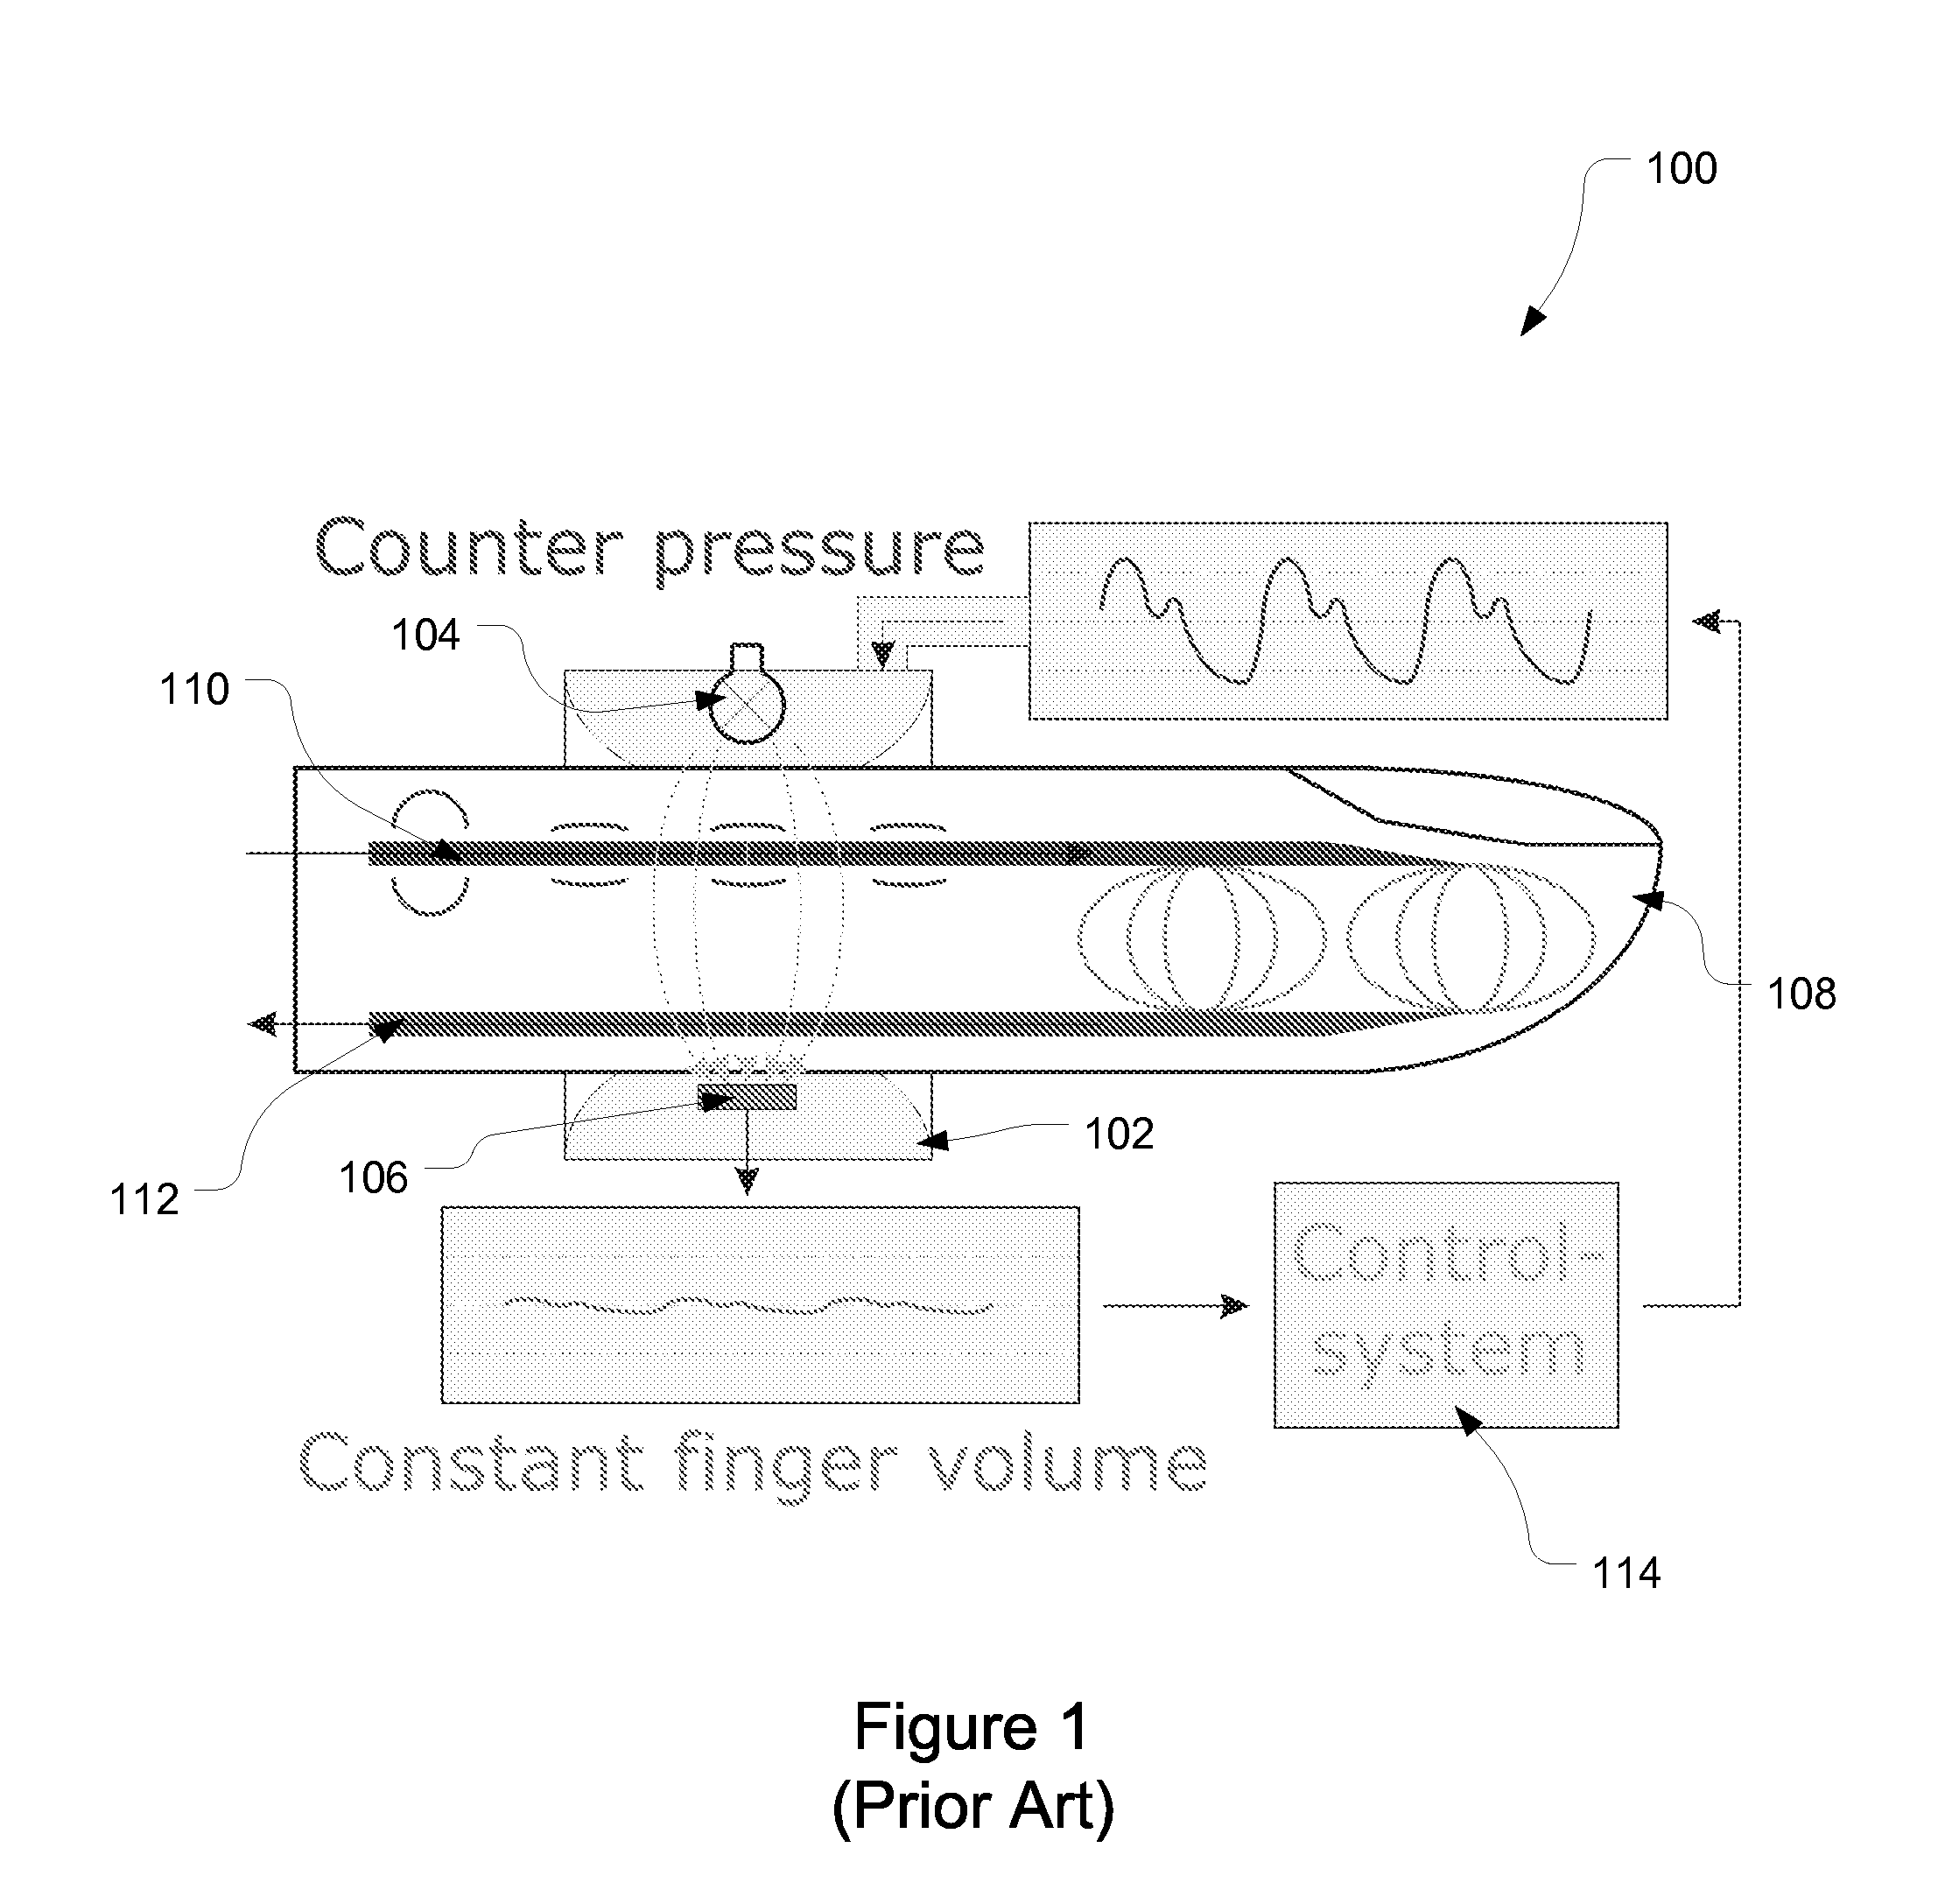 Apparatus and method for enhancing and analyzing signals from a continuous non-invasive blood pressure device